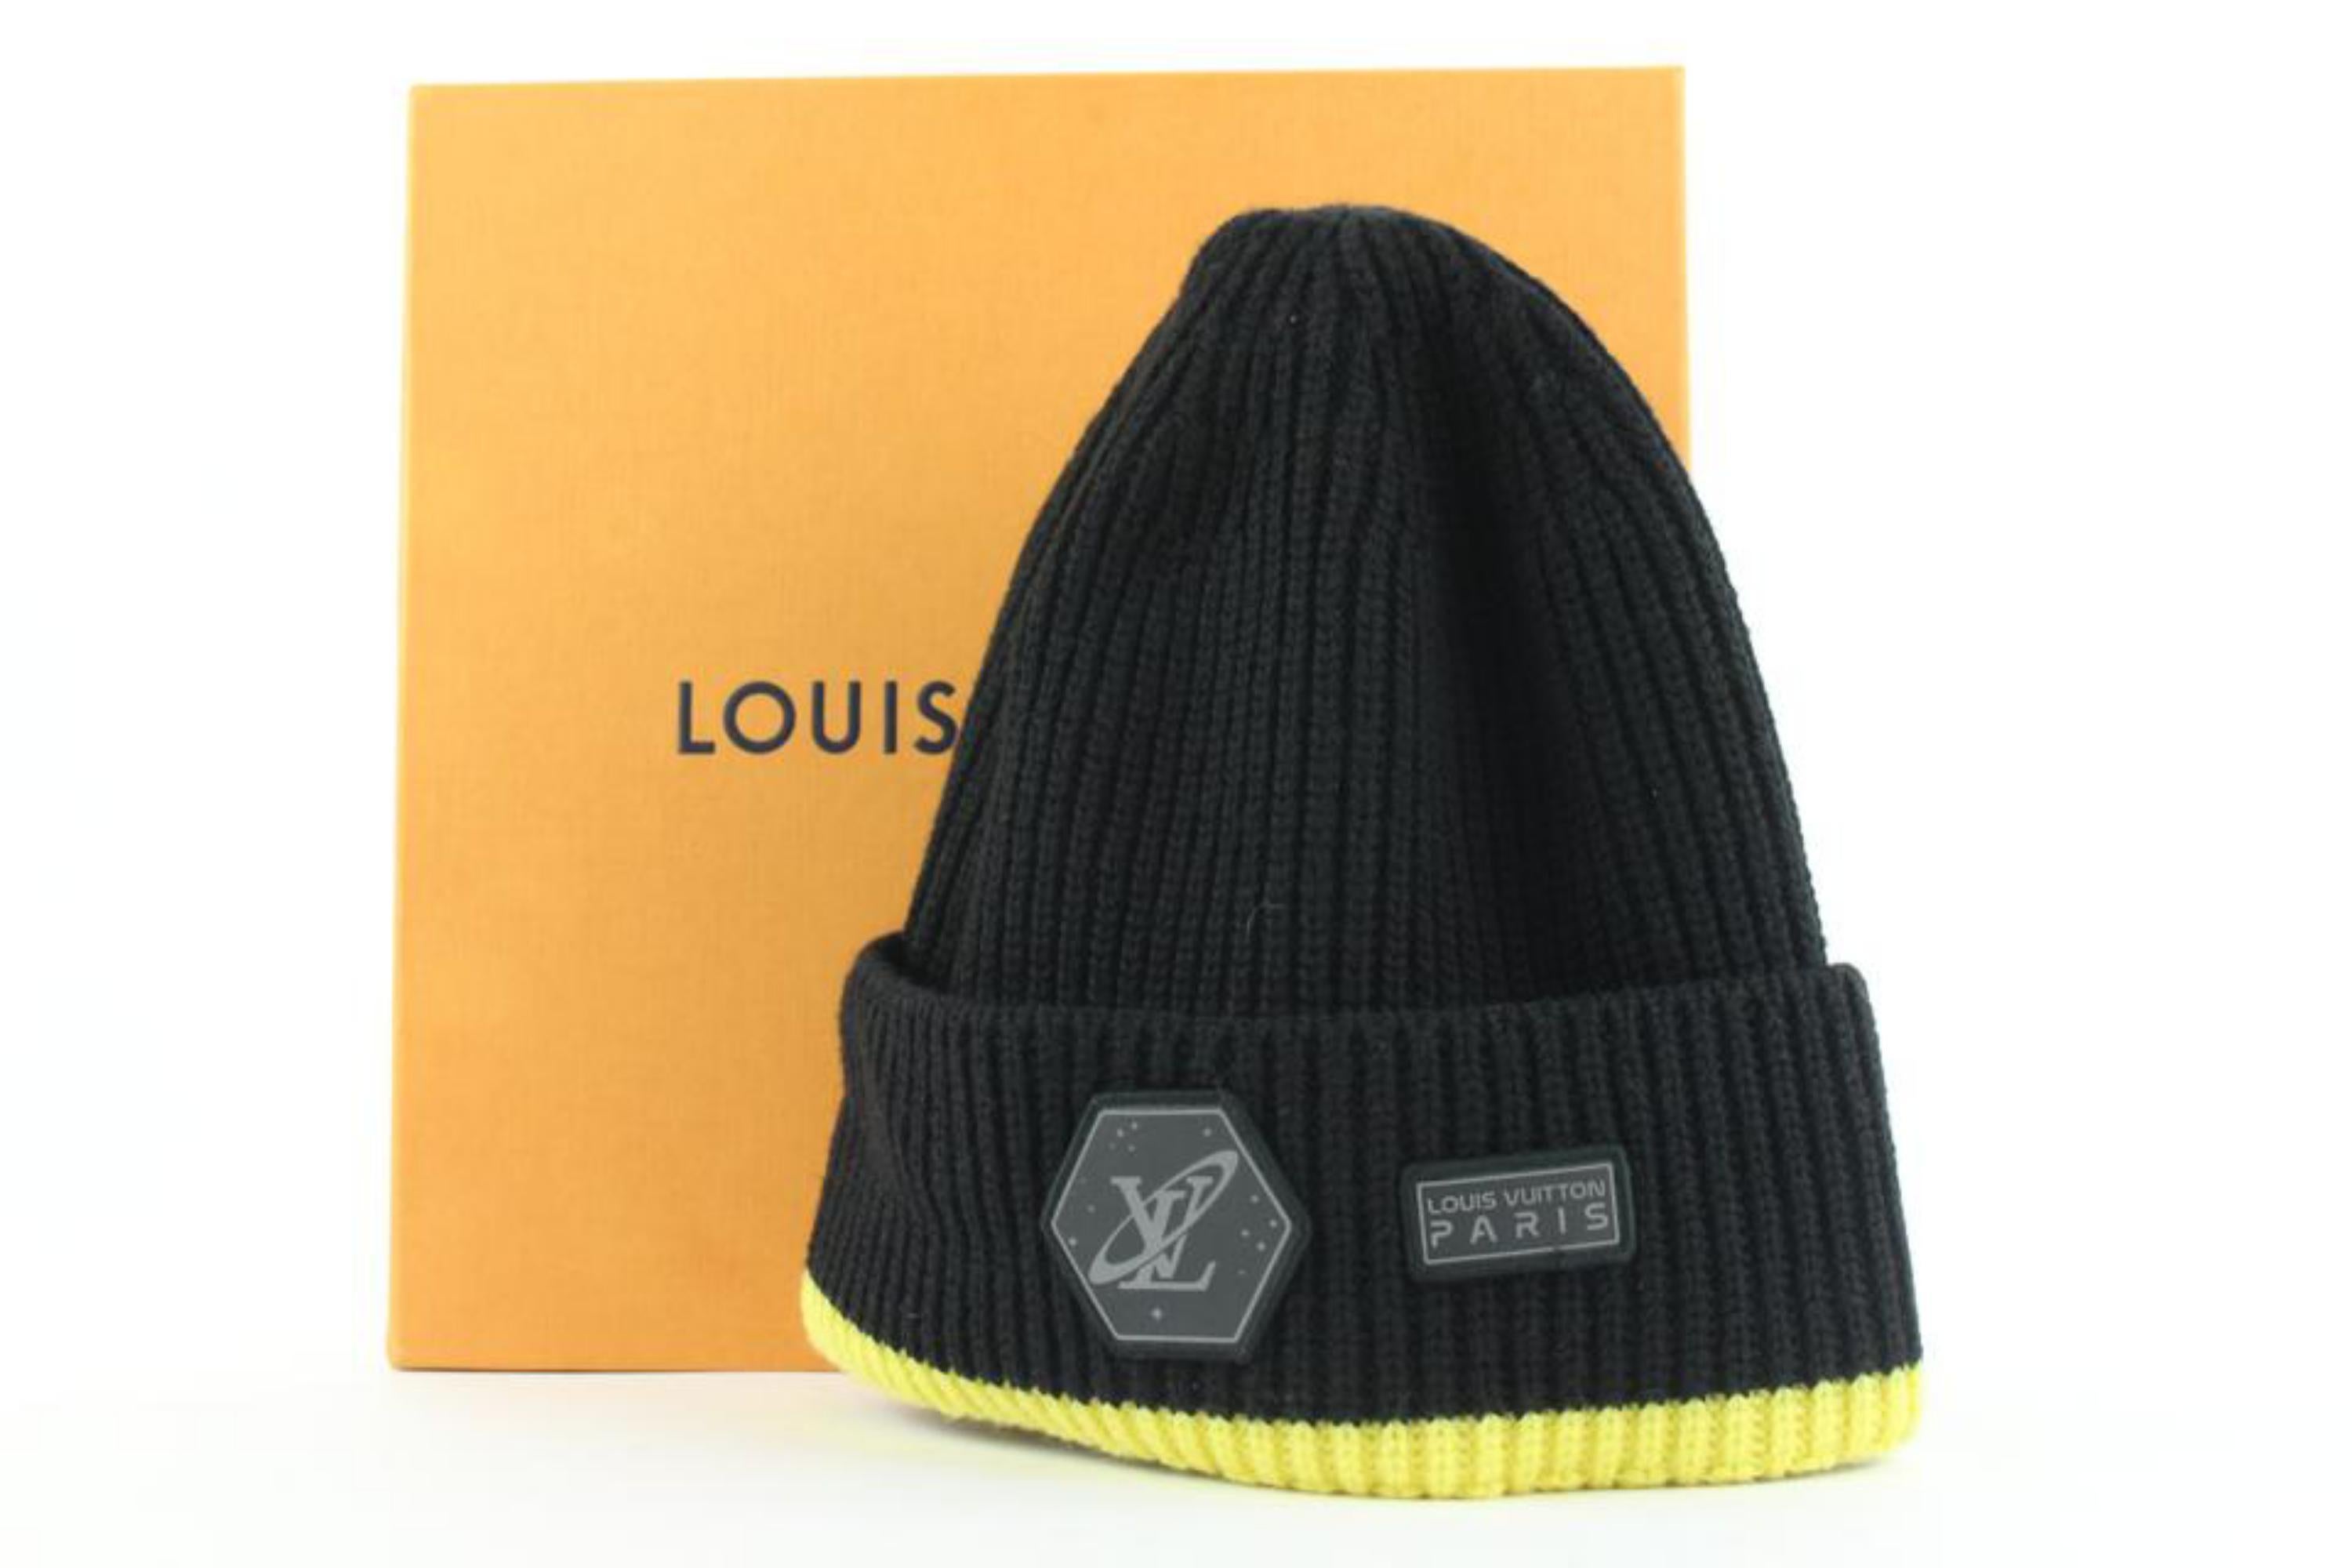 Authentic Snuggle Up Olive Louis Vuitton Beanie